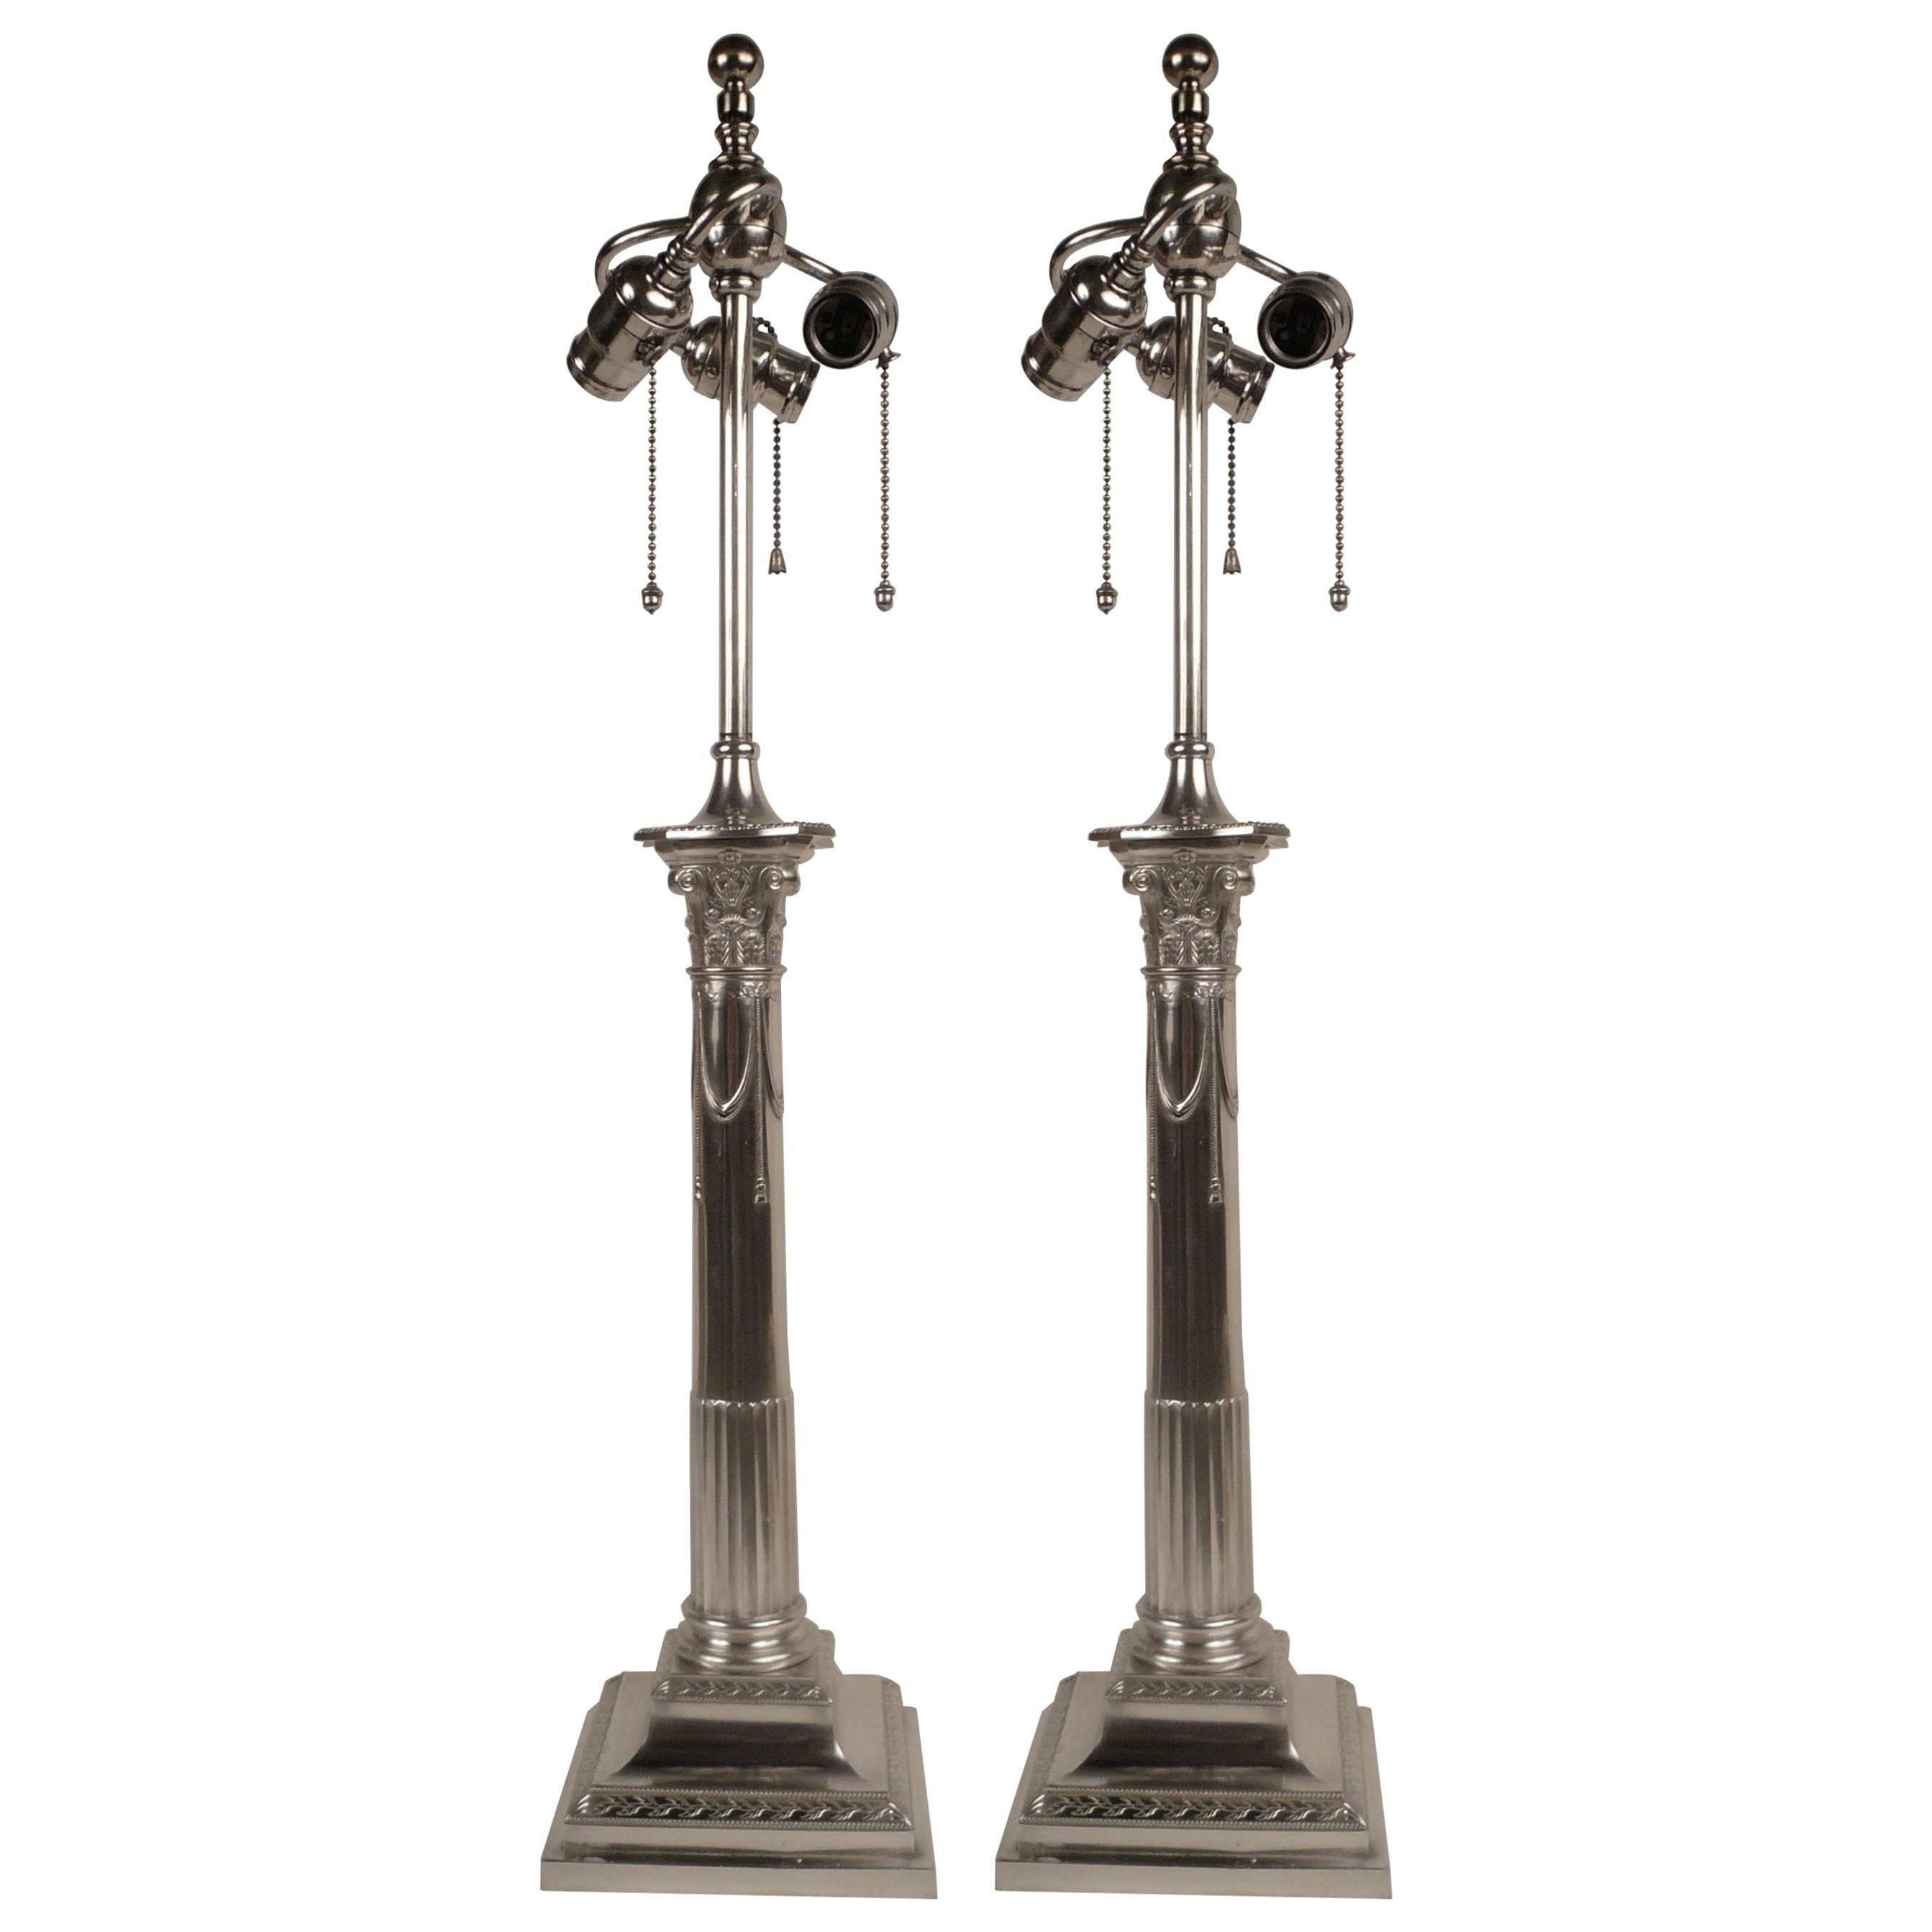 Pair of E. F. Caldwell Silver Plated Columnar Lamps